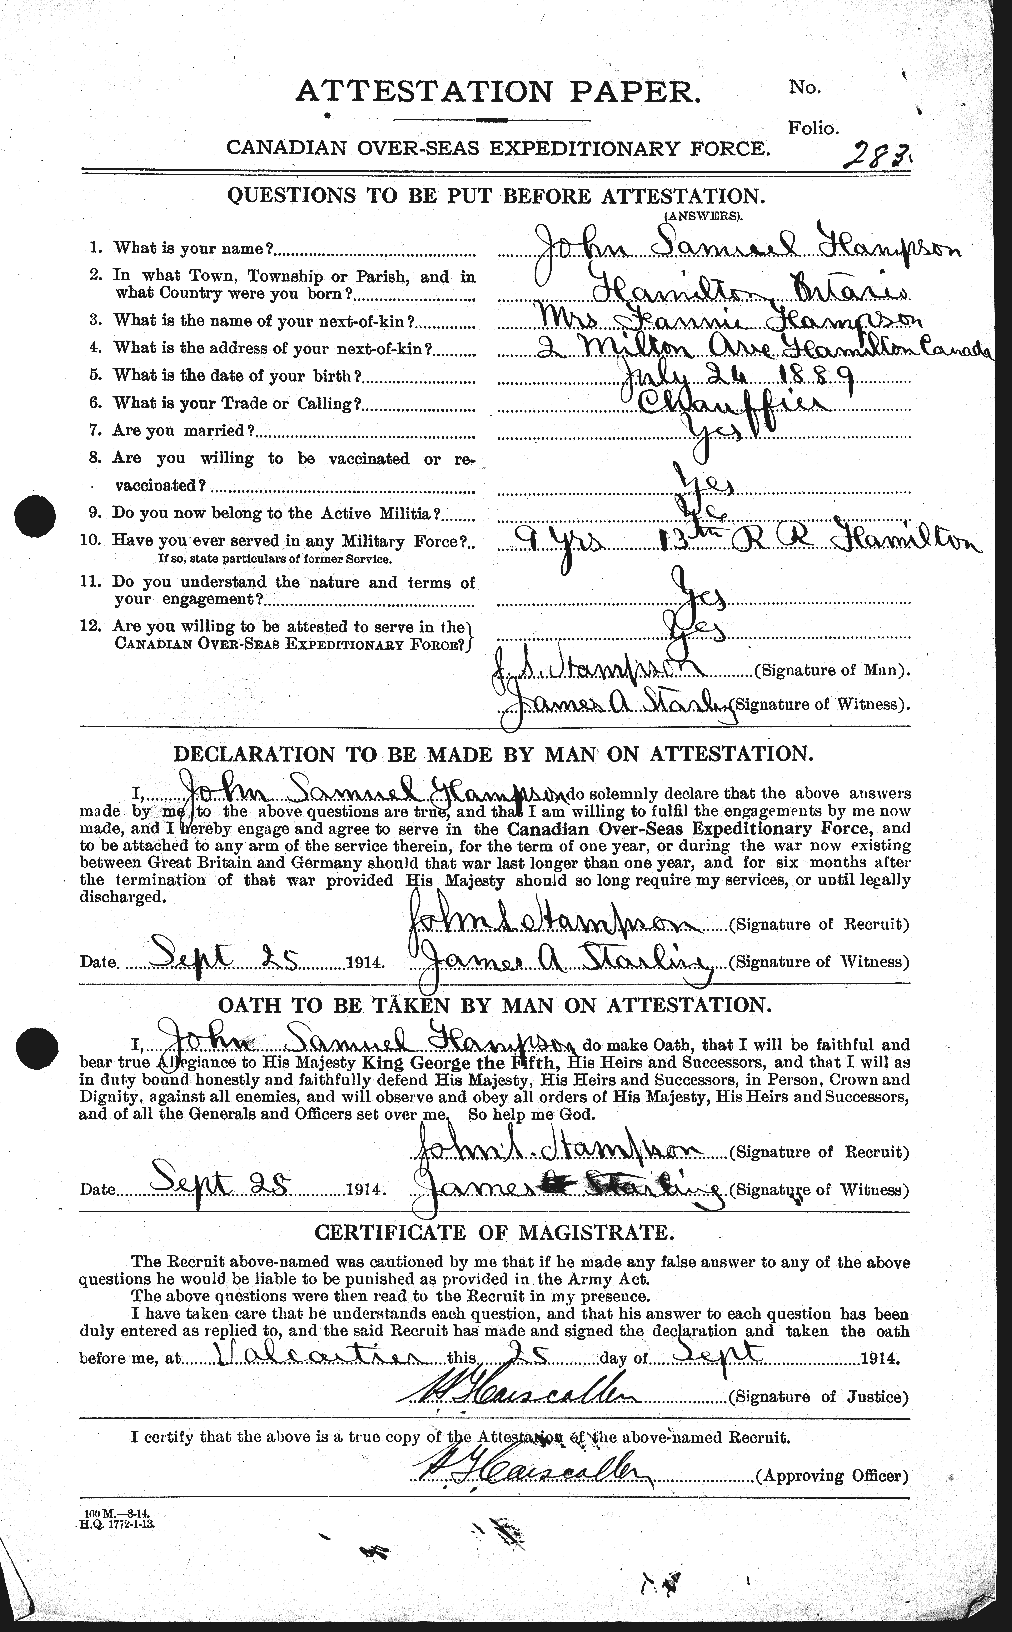 Personnel Records of the First World War - CEF 373555a